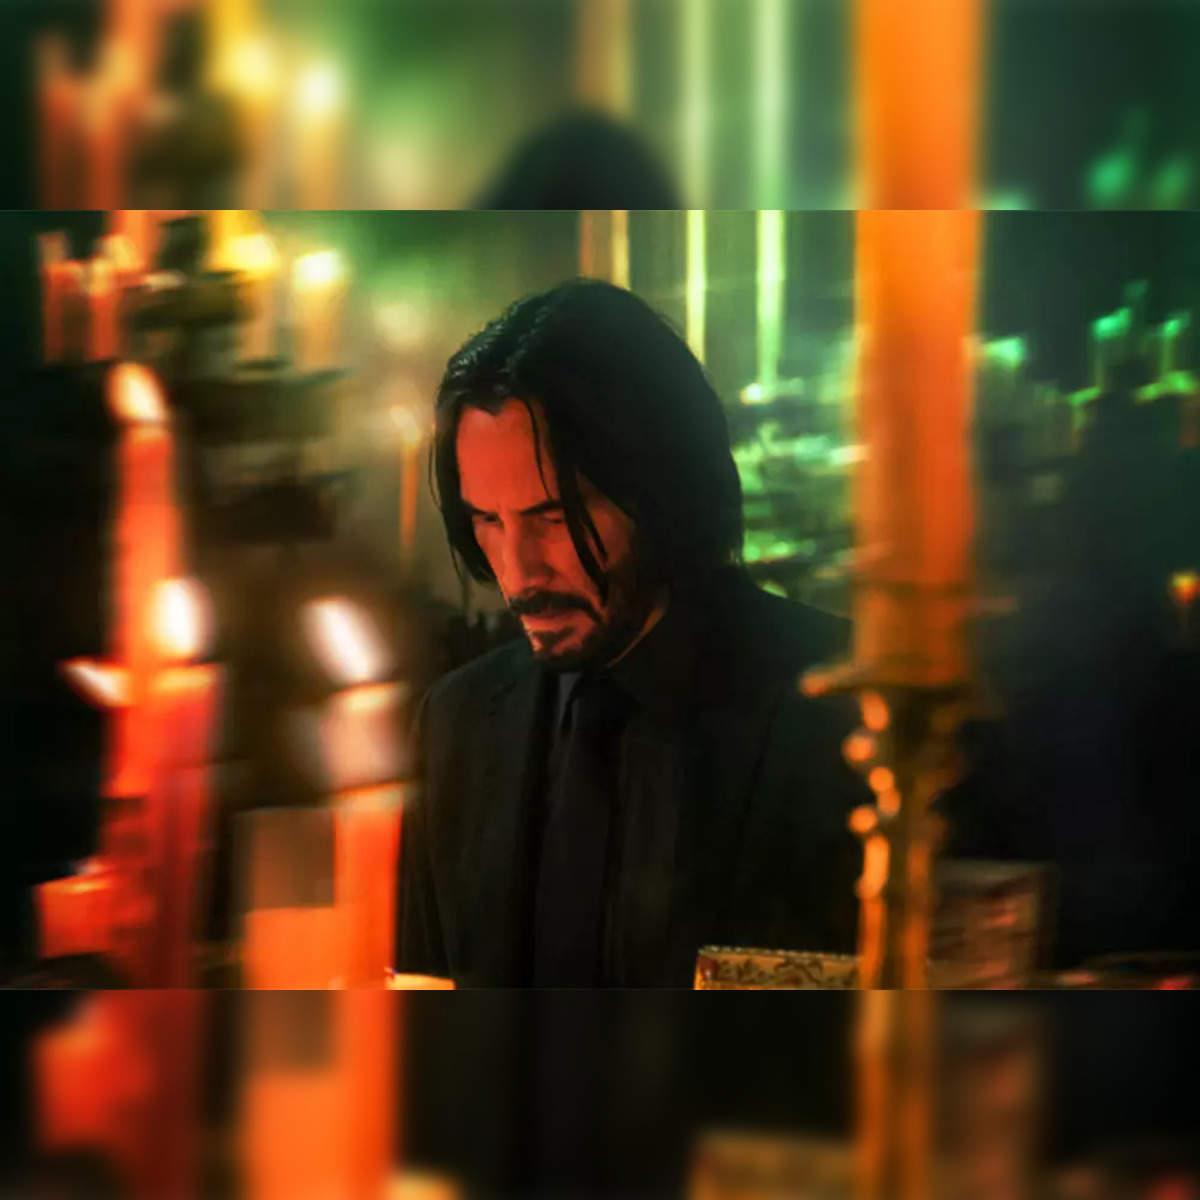 How to Watch the John Wick Trilogy on Netflix